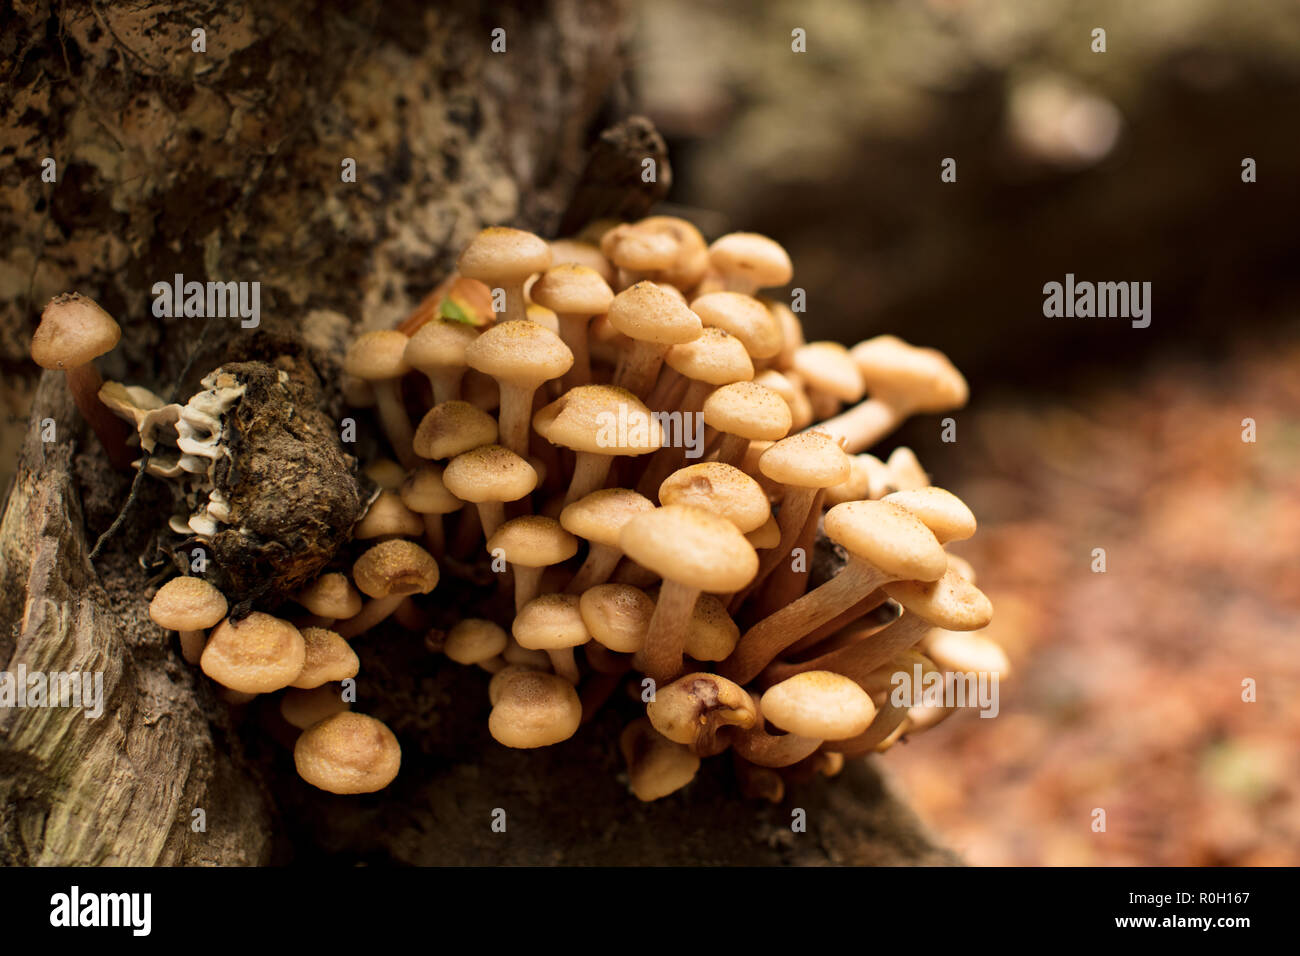 Mushrooms in a forest, Pilze im Wald Stock Photo